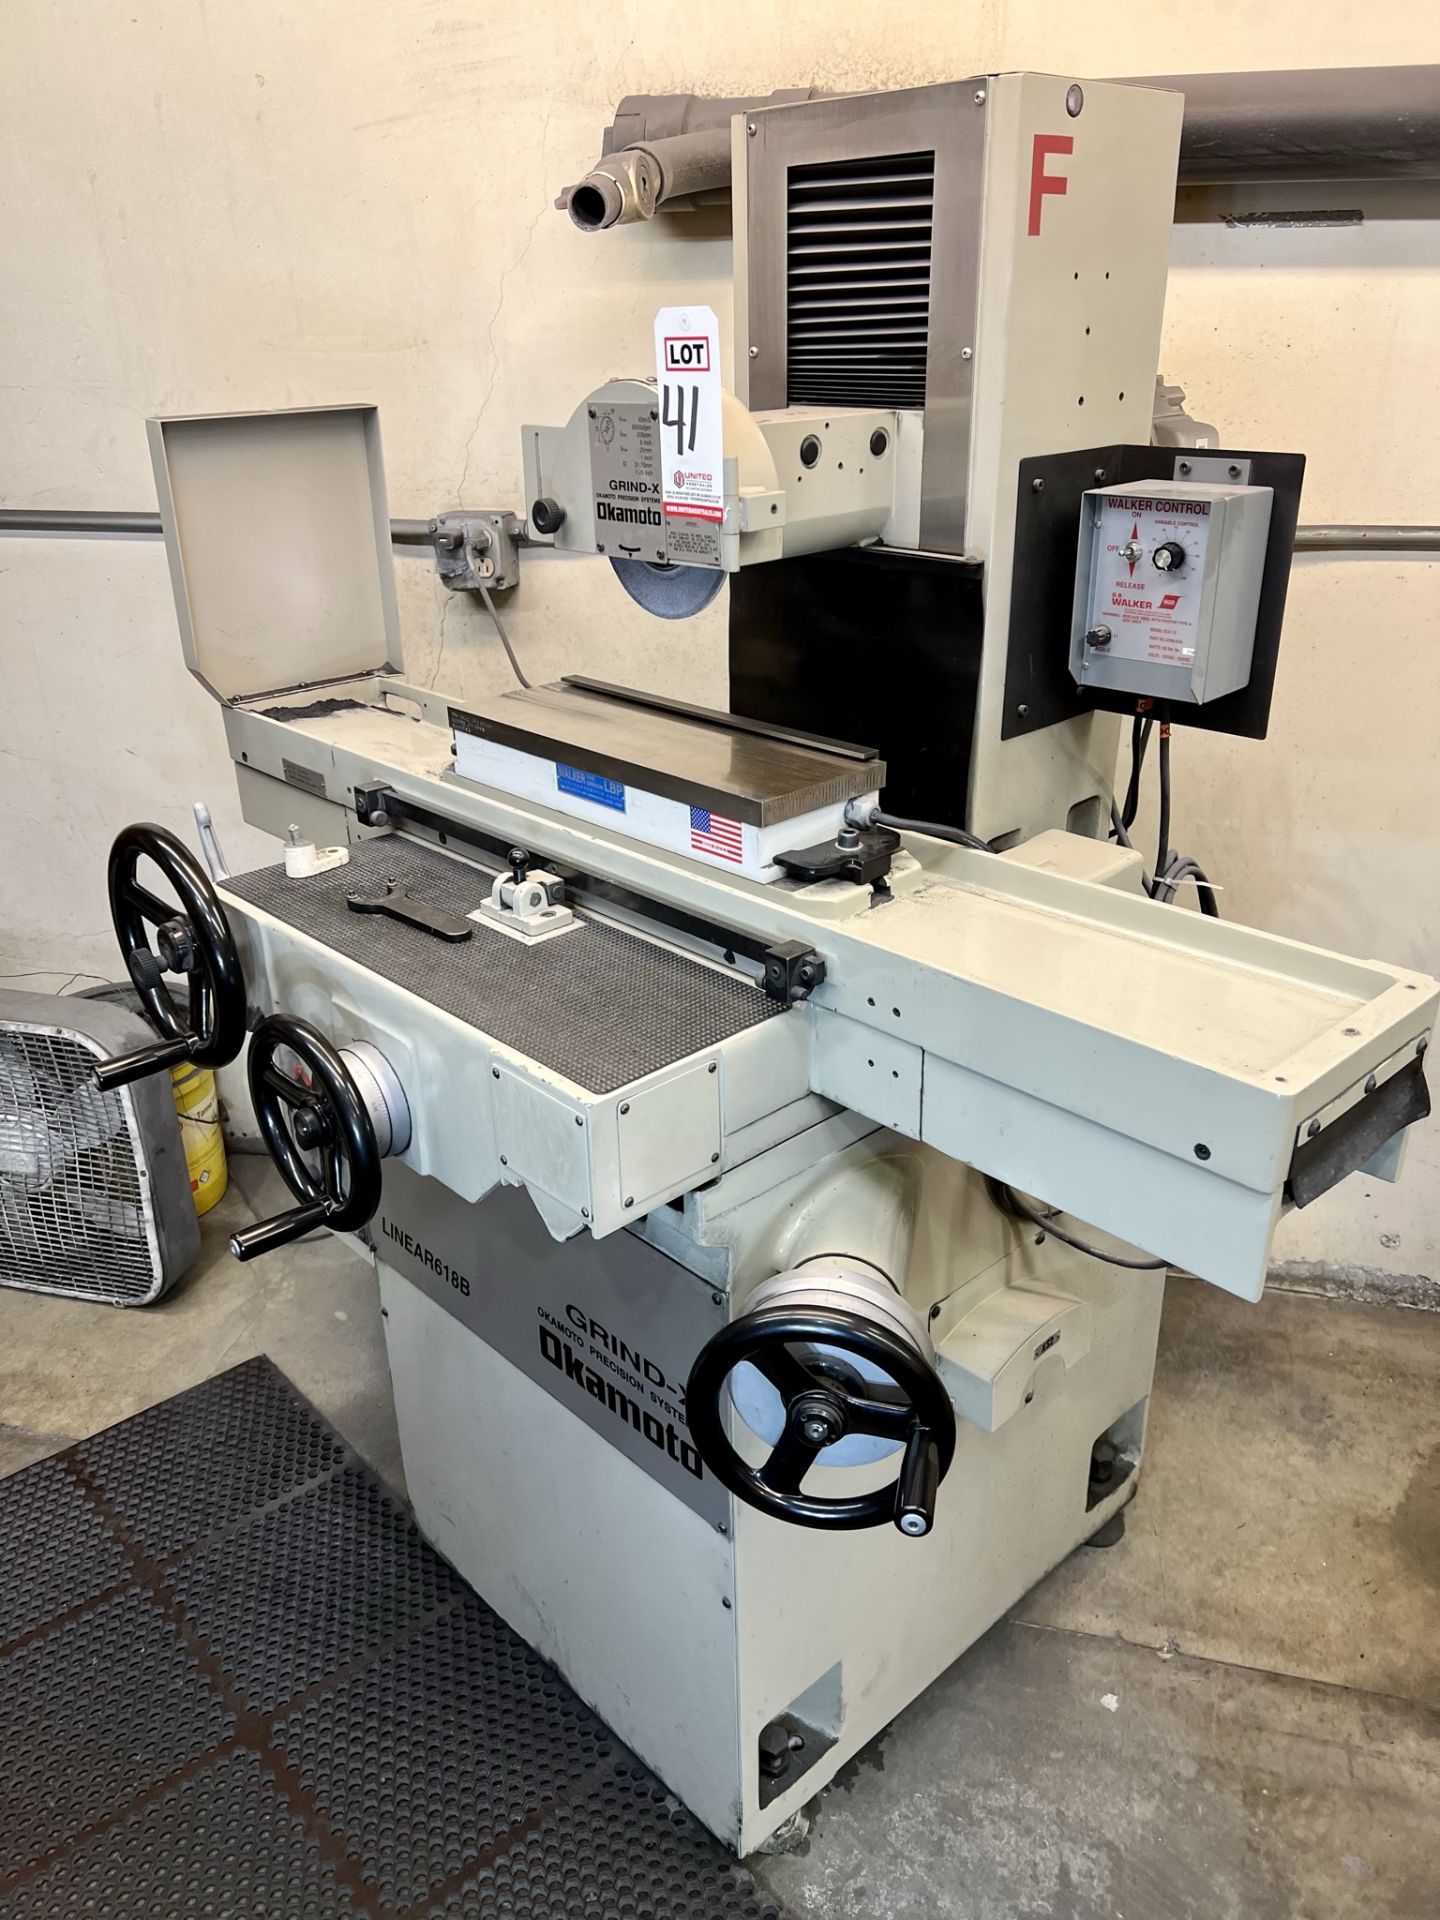 2018 OKAMOTO LINEAR 618B SURFACE GRINDER, S/N 48824, W/ WALKER 18" X 6" MAGNETIC CHUCK AND CONTROLS, - Image 2 of 15